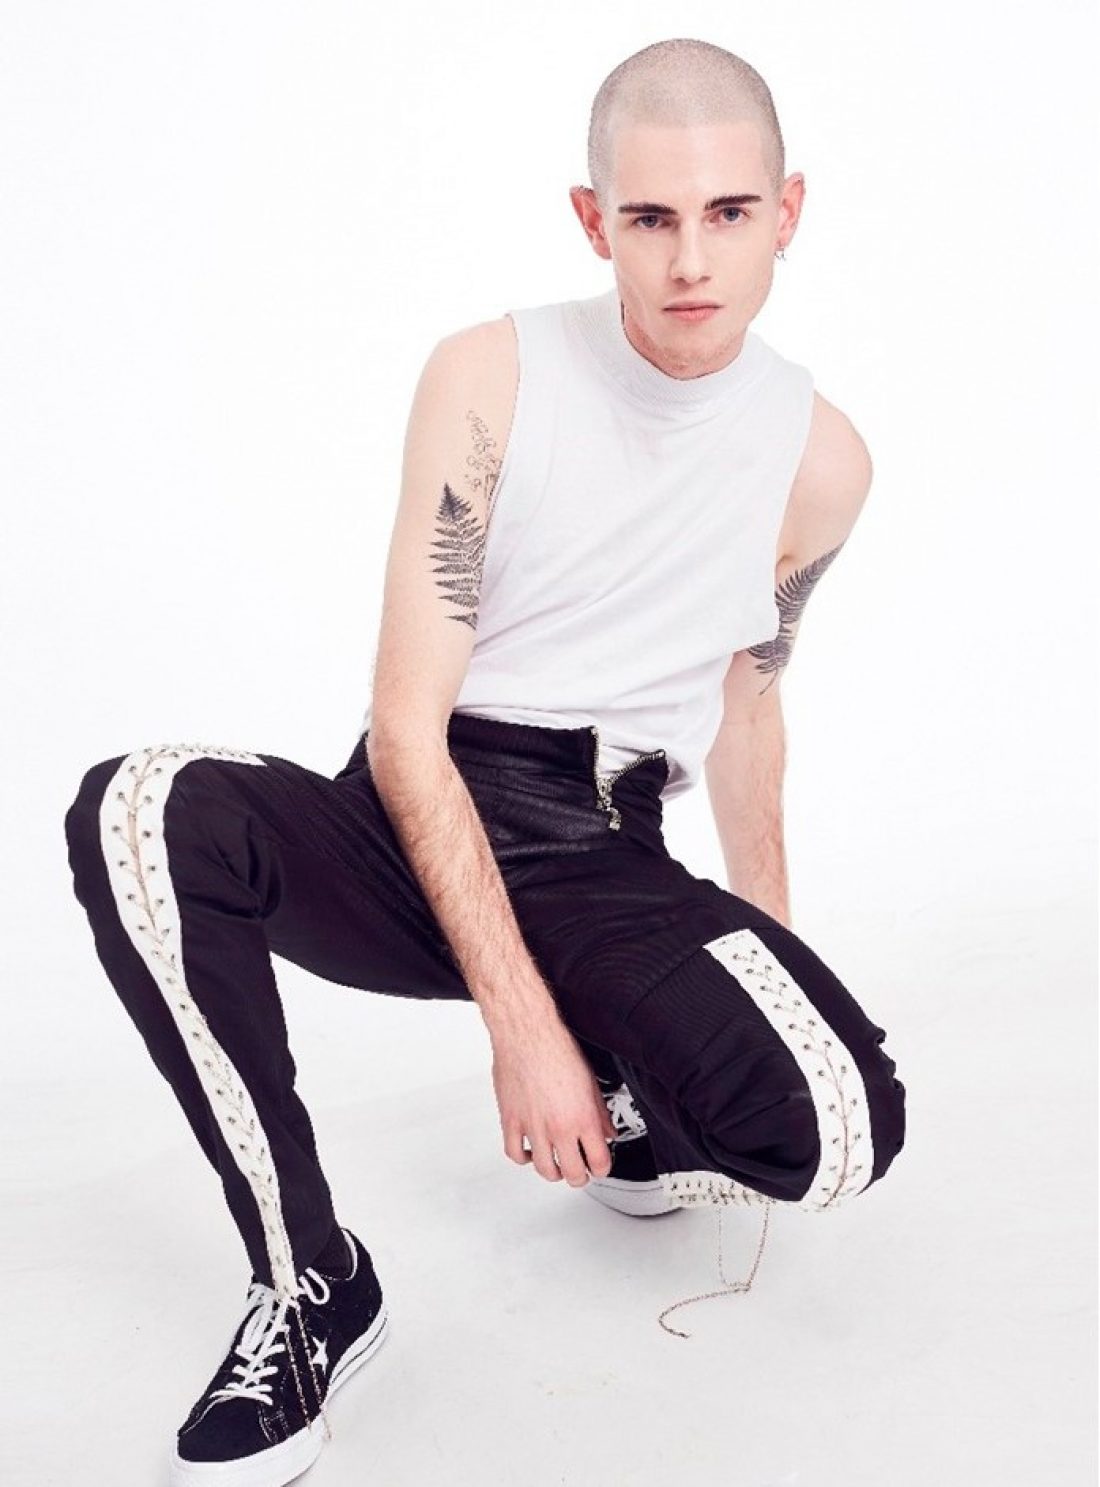 Lochie Stonehouse photographed for Blacklist by Stephen Tilley in Converse